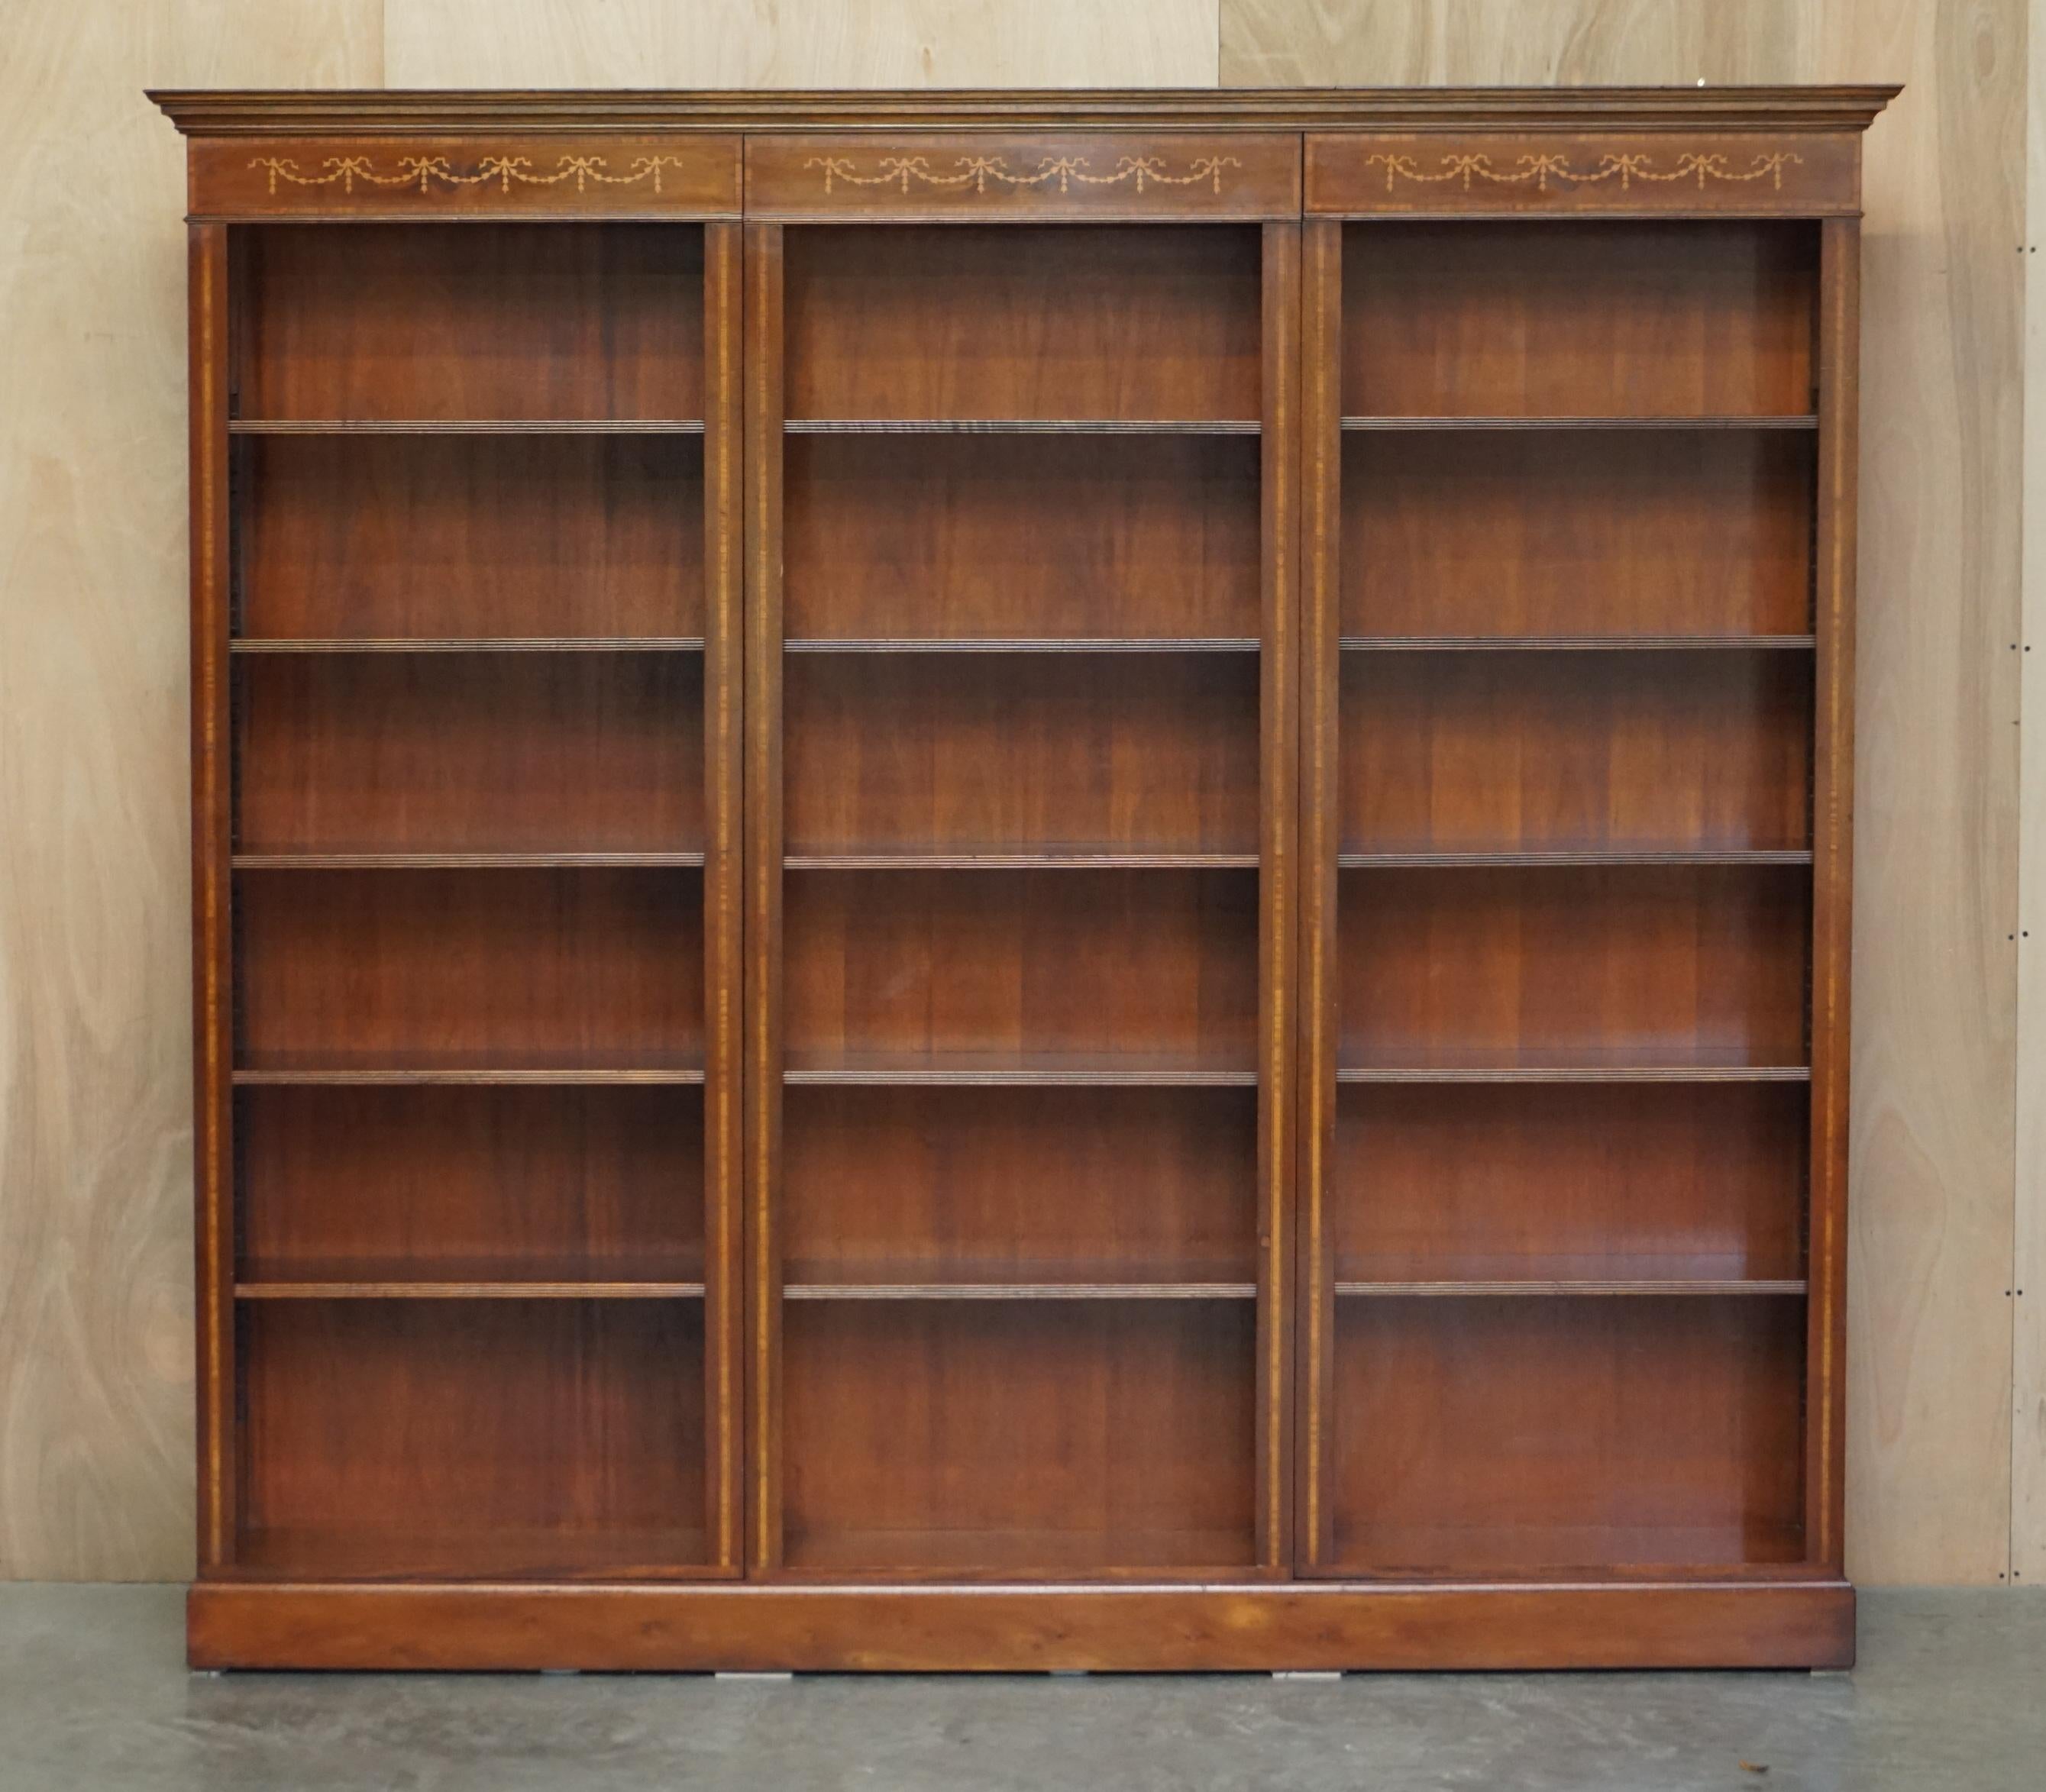 We are delighted to offer for sale this lovely vintage Burr Walnut, Marquetry inlaid, triple bank, open library bookcase with height adjustable shelves 

A very good looking well made and decorative open library bookcase, the shelves are fully